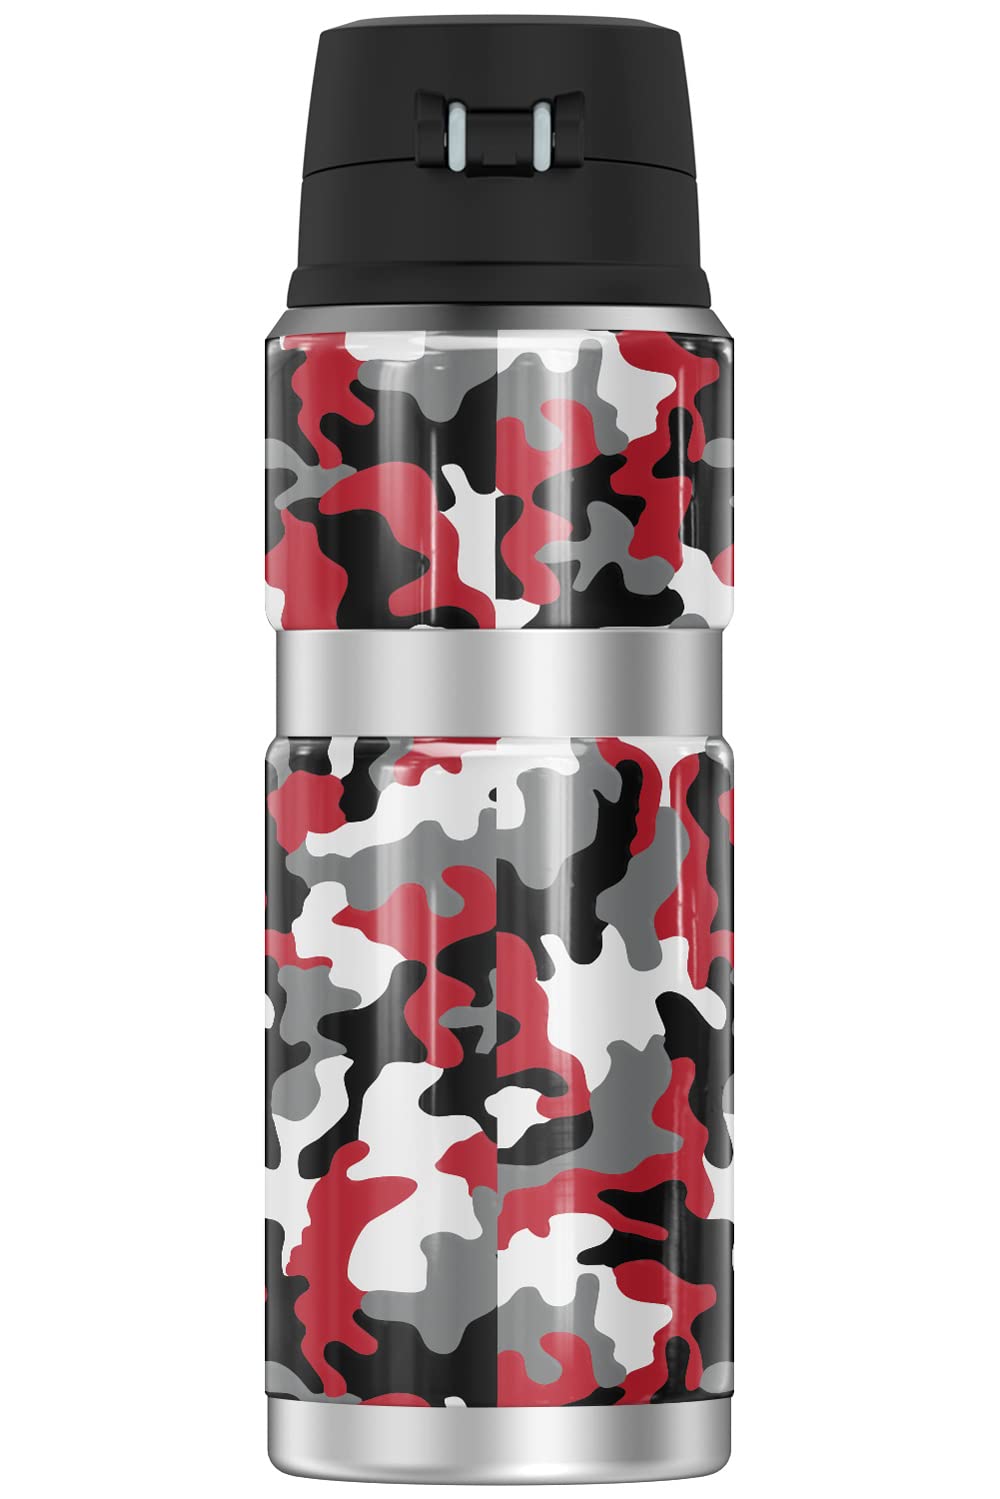 THERMOS Rutgers University OFFICIAL Camo STAINLESS KING Stainless Steel Drink Bottle, Vacuum insulated & Double Wall, 24oz